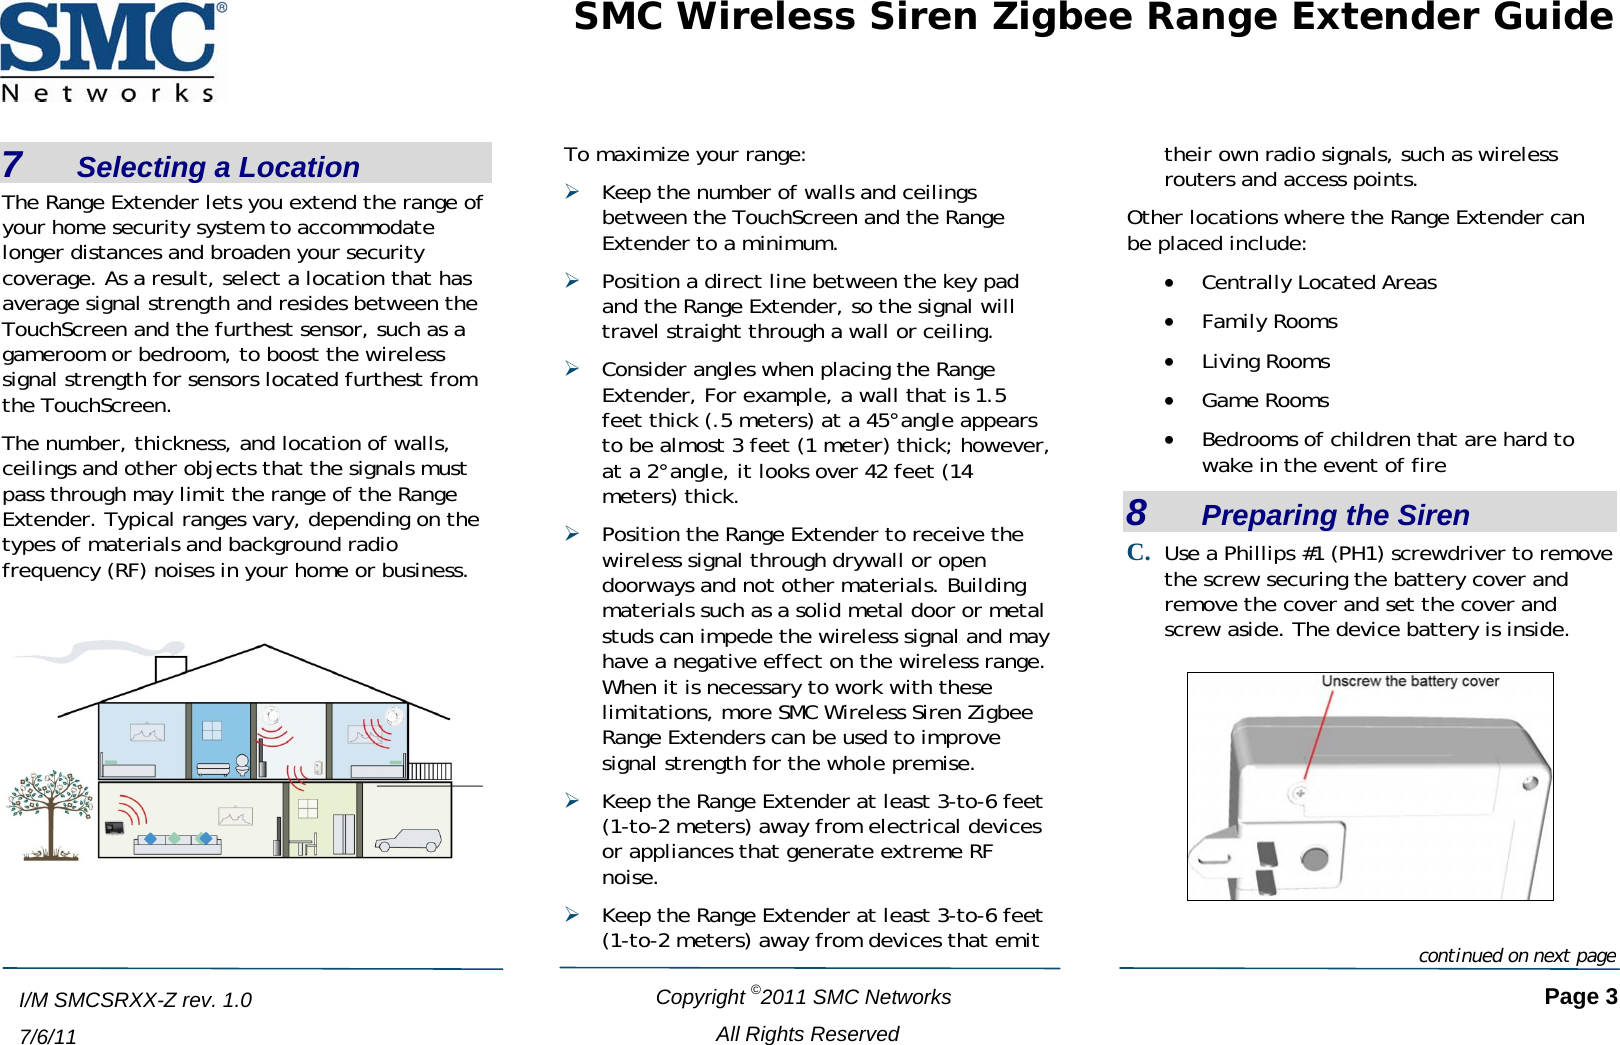 SMC Wireless Siren Zigbee Range Extender Guide   Copyright ©2011 SMC Networks   Page 3 All Rights Reserved  I/M SMCSRXX-Z rev. 1.0 7/6/11 7    Selecting a Location The Range Extender lets you extend the range of your home security system to accommodate longer distances and broaden your security coverage. As a result, select a location that has average signal strength and resides between the TouchScreen and the furthest sensor, such as a gameroom or bedroom, to boost the wireless signal strength for sensors located furthest from the TouchScreen. The number, thickness, and location of walls, ceilings and other objects that the signals must pass through may limit the range of the Range Extender. Typical ranges vary, depending on the types of materials and background radio frequency (RF) noises in your home or business.   To maximize your range: ¾ Keep the number of walls and ceilings between the TouchScreen and the Range Extender to a minimum. ¾ Position a direct line between the key pad and the Range Extender, so the signal will travel straight through a wall or ceiling.  ¾ Consider angles when placing the Range Extender, For example, a wall that is 1.5 feet thick (.5 meters) at a 45°angle appears to be almost 3 feet (1 meter) thick; however, at a 2°angle, it looks over 42 feet (14 meters) thick. ¾ Position the Range Extender to receive the wireless signal through drywall or open doorways and not other materials. Building materials such as a solid metal door or metal studs can impede the wireless signal and may have a negative effect on the wireless range. When it is necessary to work with these limitations, more SMC Wireless Siren Zigbee Range Extenders can be used to improve signal strength for the whole premise. ¾ Keep the Range Extender at least 3-to-6 feet (1-to-2 meters) away from electrical devices or appliances that generate extreme RF noise. ¾ Keep the Range Extender at least 3-to-6 feet (1-to-2 meters) away from devices that emit their own radio signals, such as wireless routers and access points. Other locations where the Range Extender can be placed include: • Centrally Located Areas • Family Rooms • Living Rooms • Game Rooms • Bedrooms of children that are hard to wake in the event of fire 8    Preparing the Siren C. Use a Phillips #1 (PH1) screwdriver to remove the screw securing the battery cover and remove the cover and set the cover and screw aside. The device battery is inside.   continued on next page